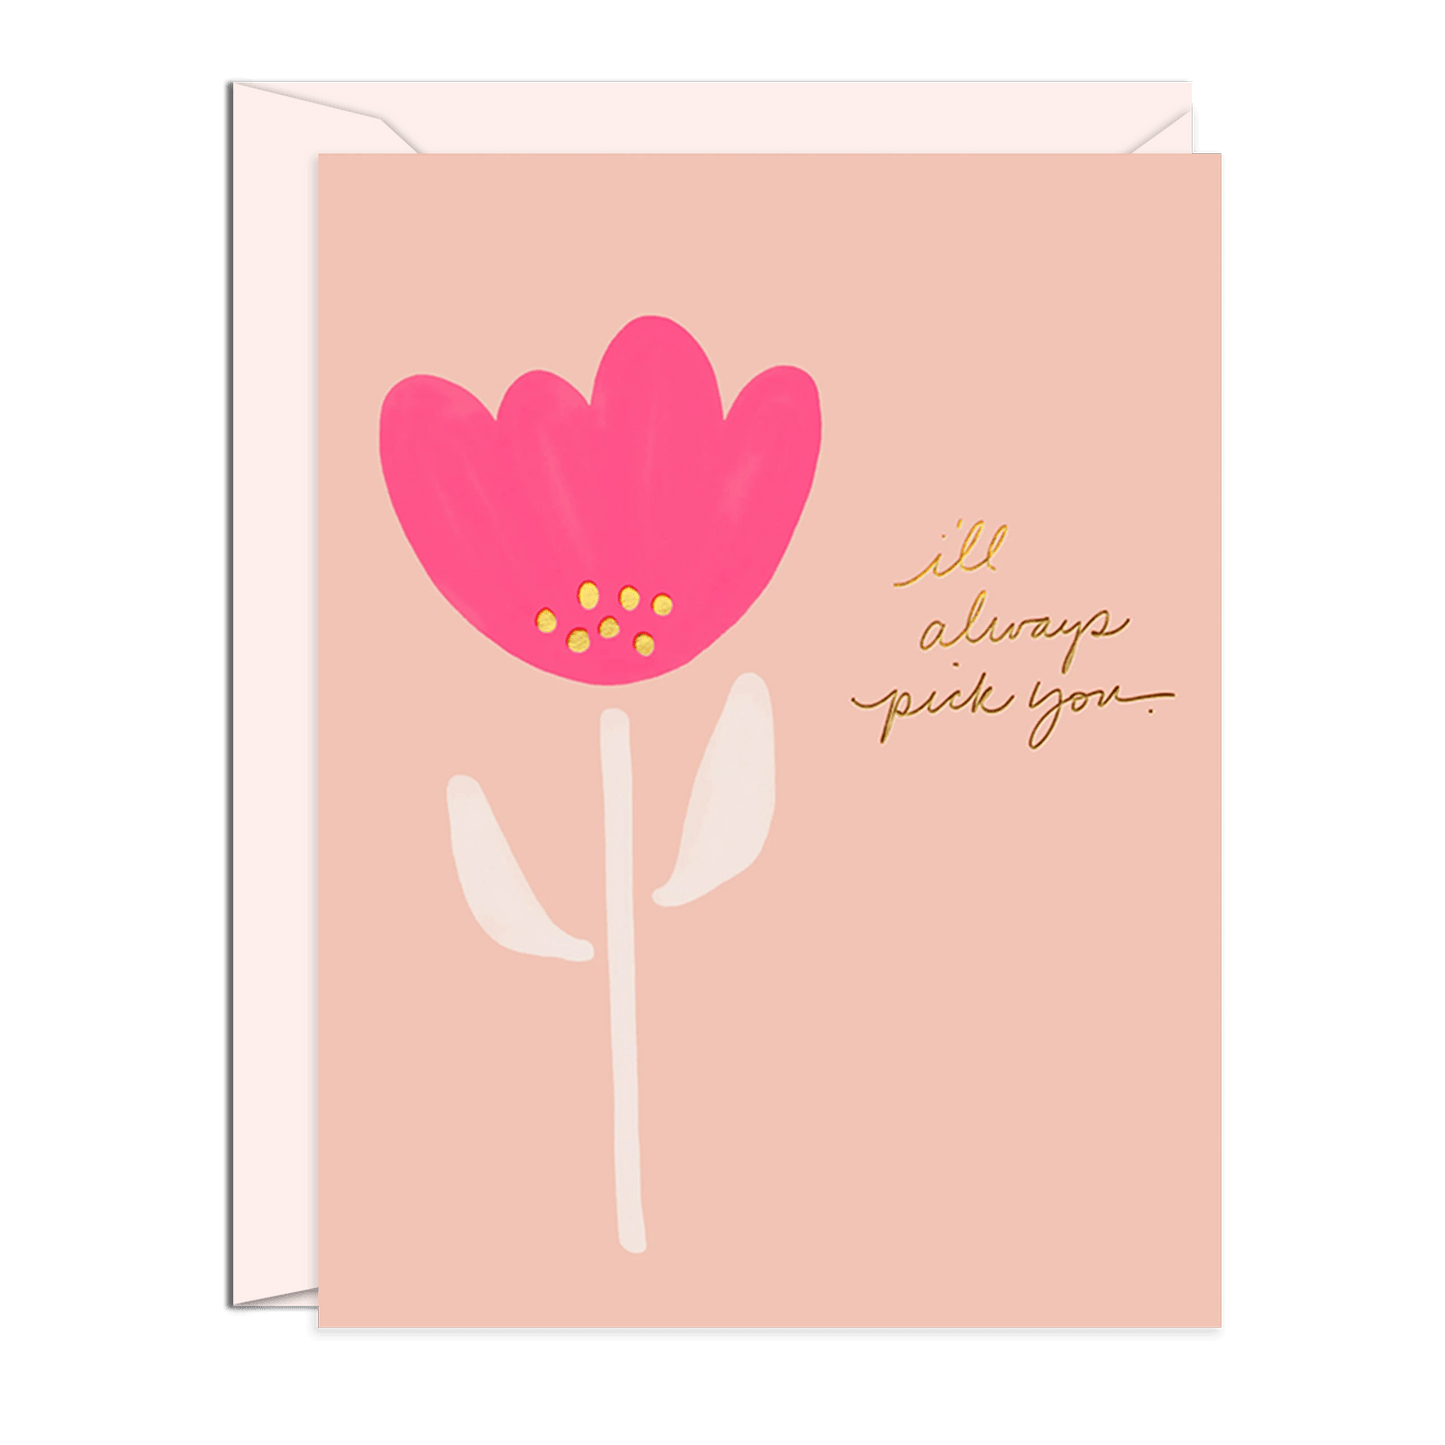 Greeting card with pink flower illustration and handwritten text: ‘I’ll always pick you.’ Order online for event items from the best florist in Toronto near you.